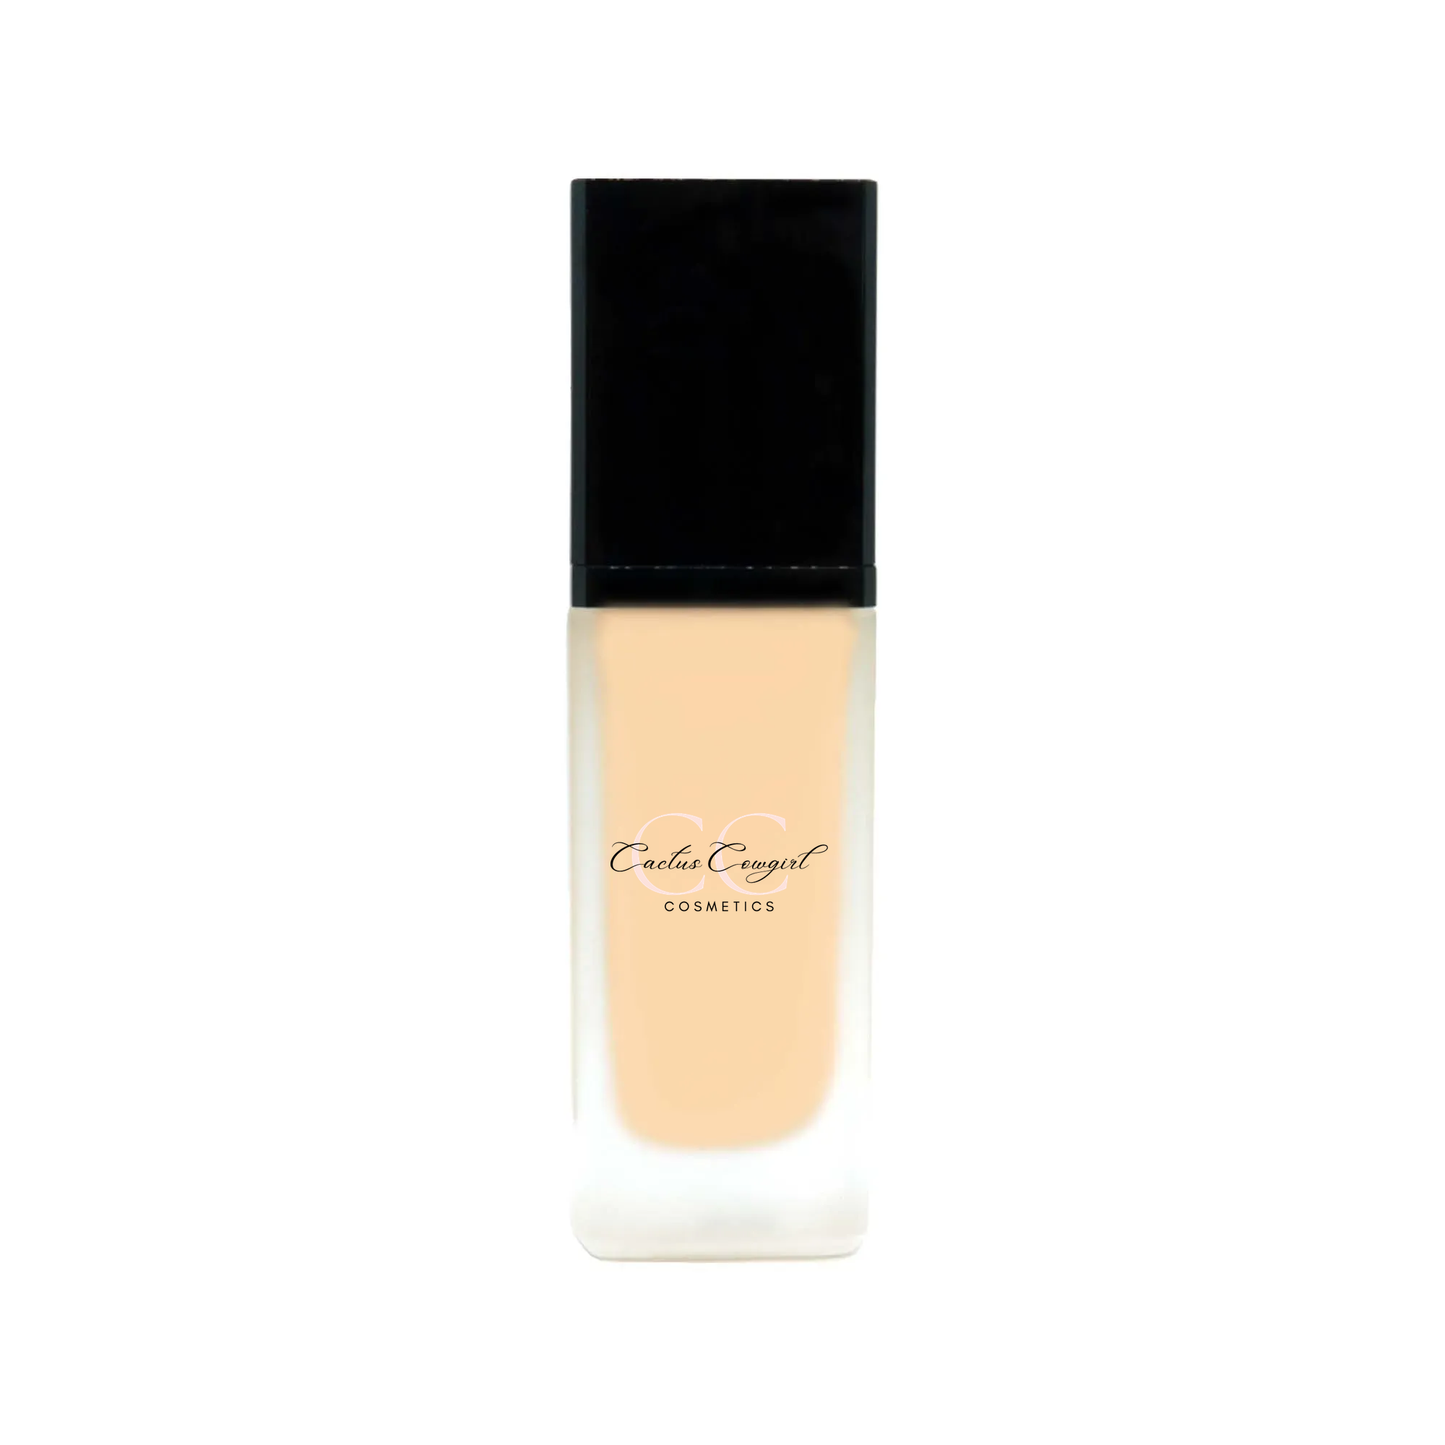 Foundation with SPF - Peach - Cactus Cowgirl